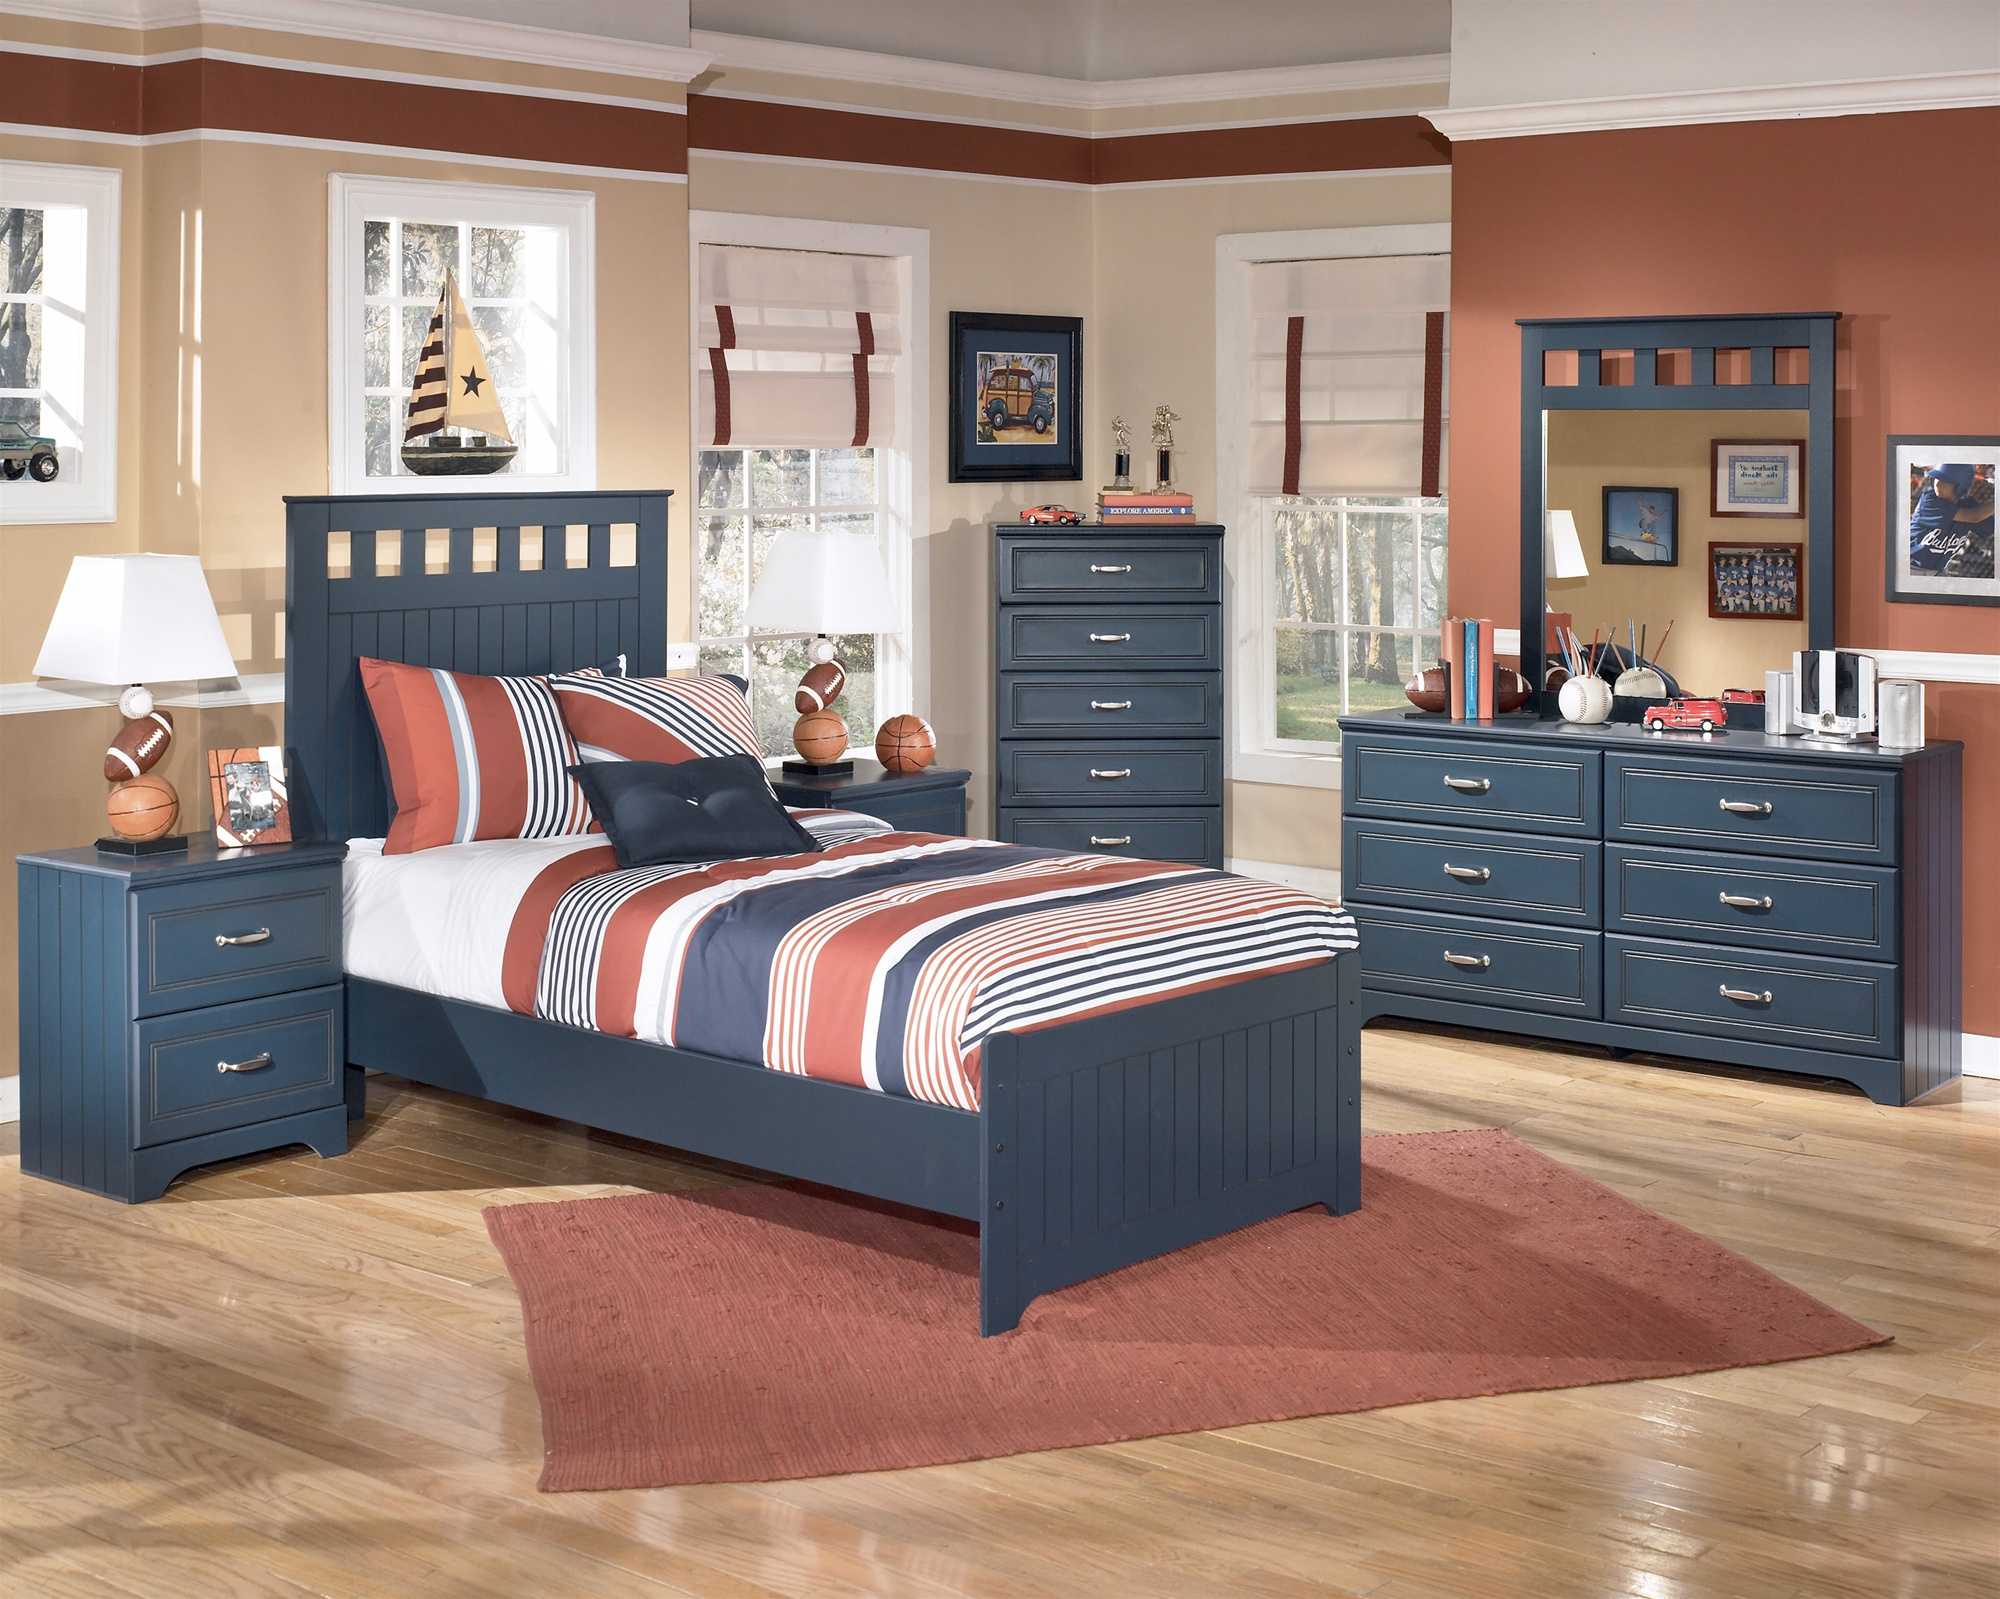 Simple Youth Bedroom Furniture Ideas with Modern Garage